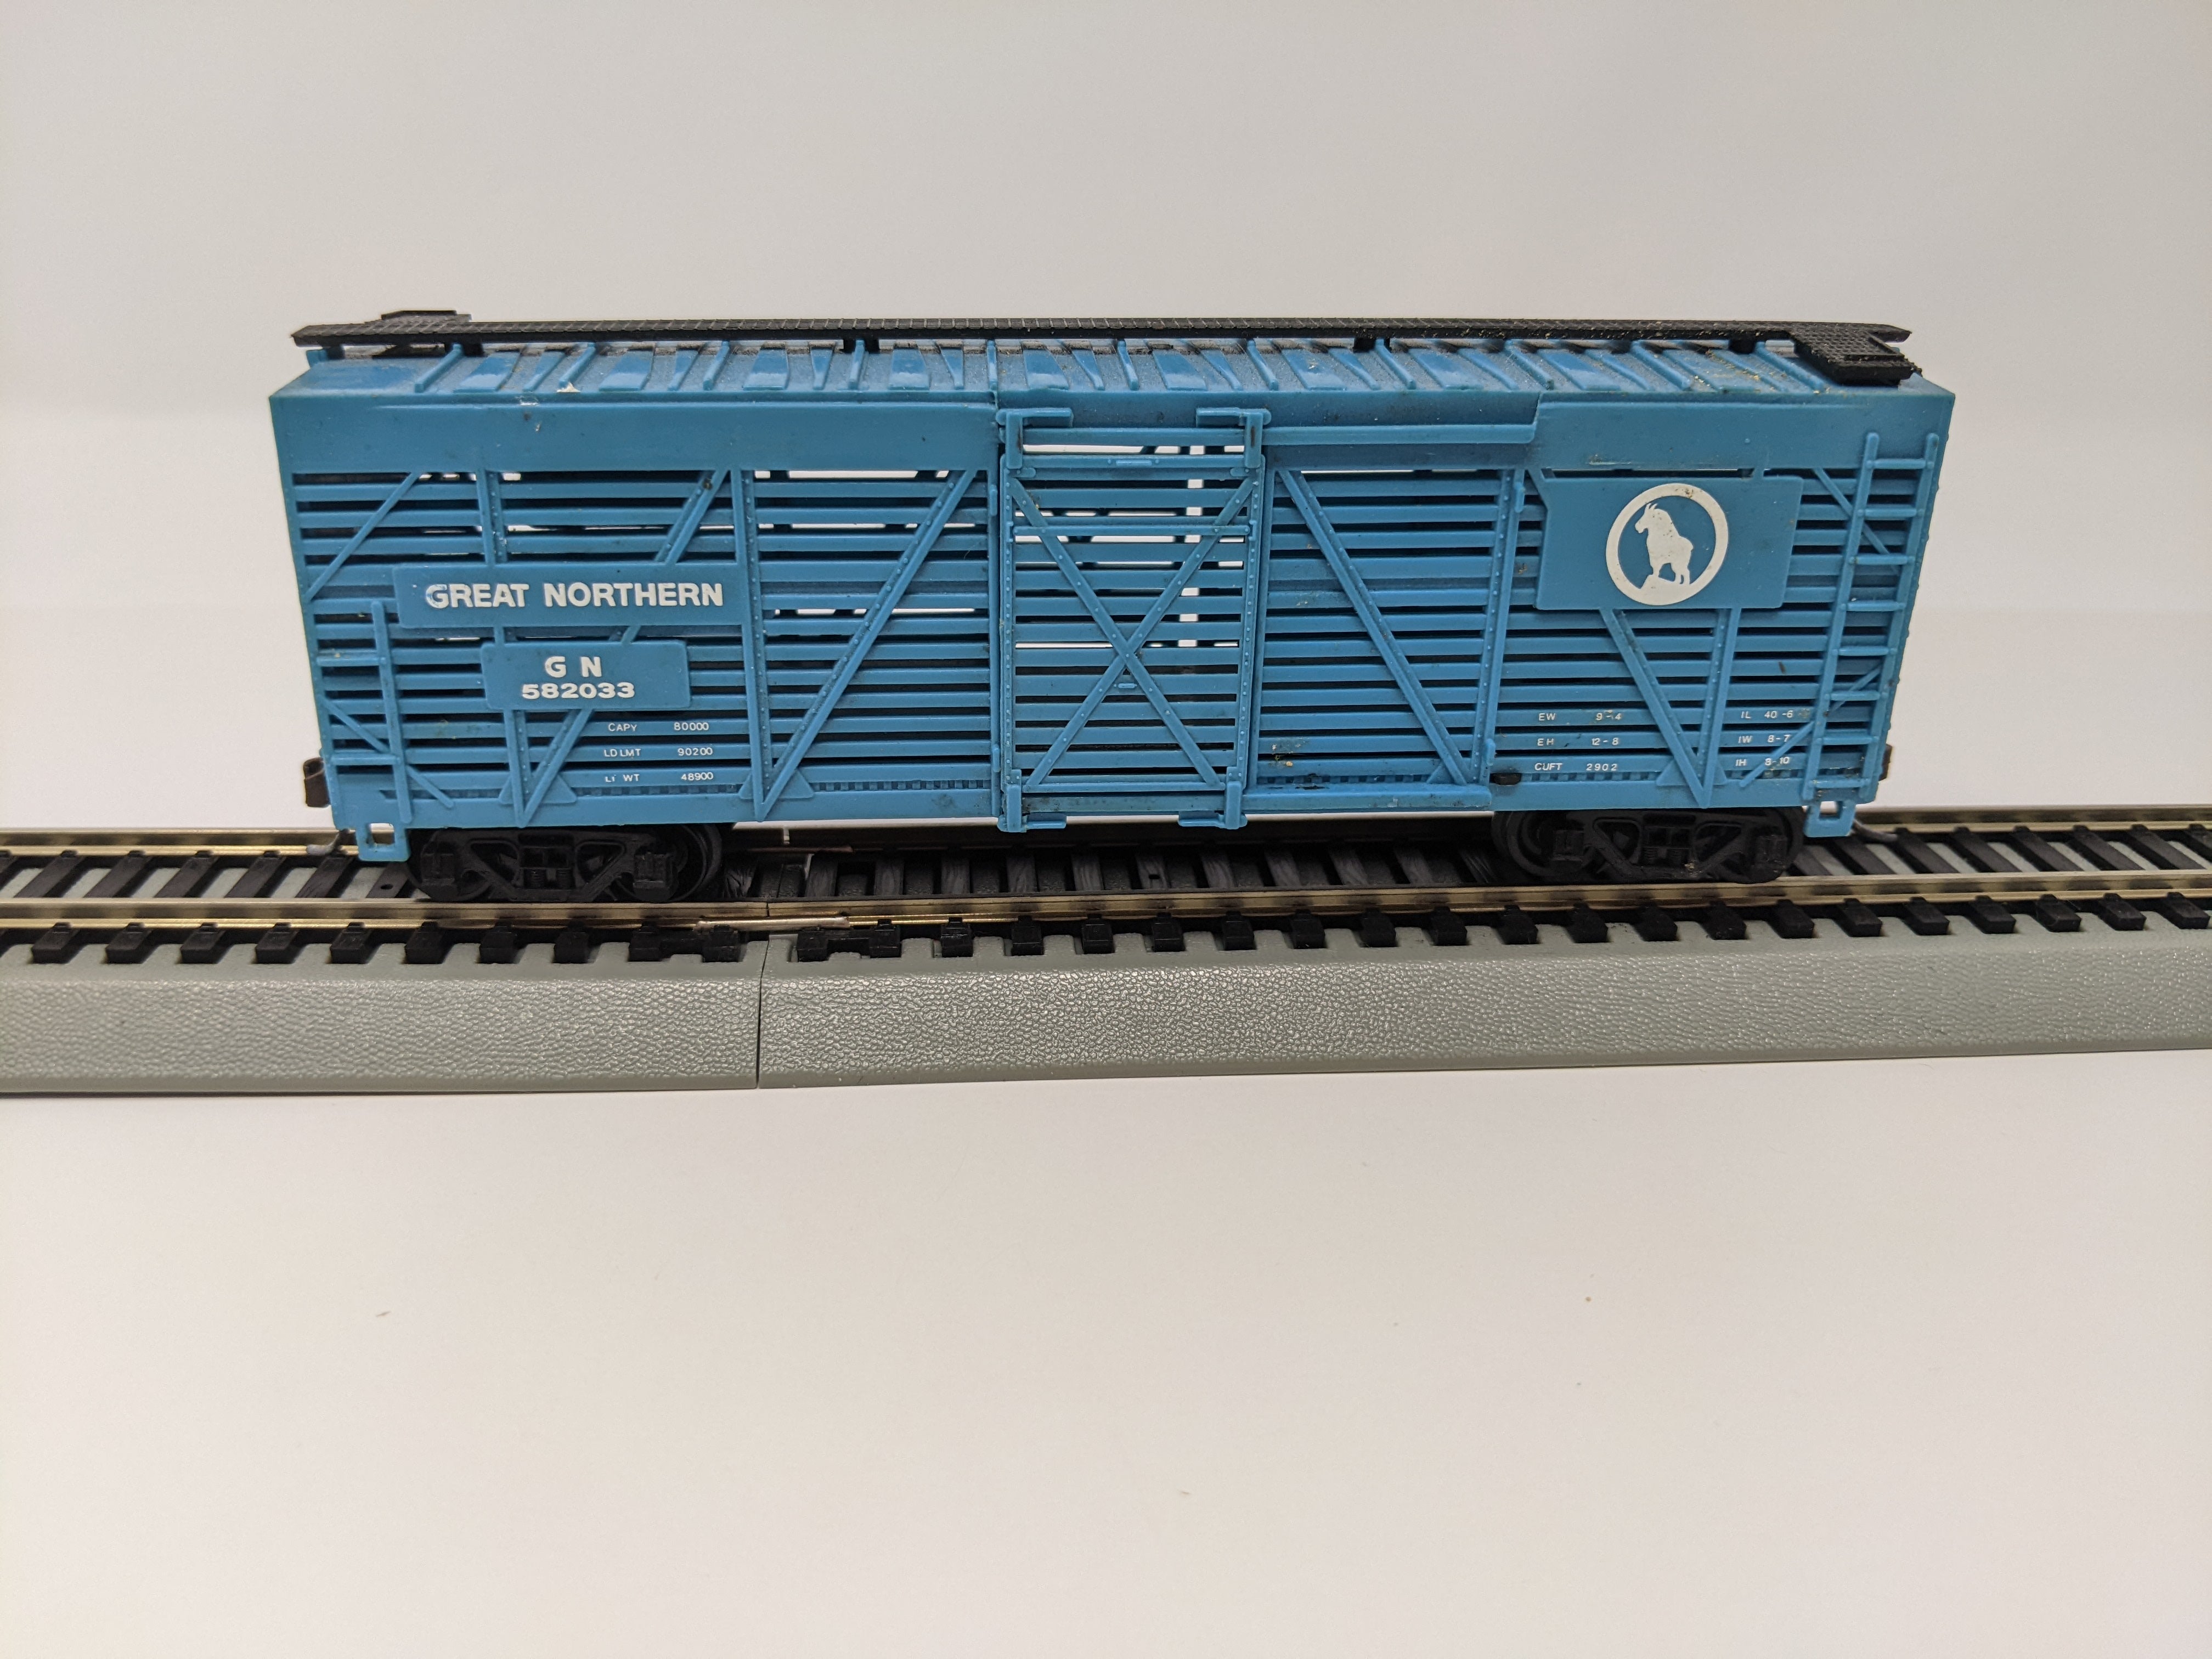 USED Bachmann HO Scale, 40' Stock Car, Great Northern GN #582033, Read Description